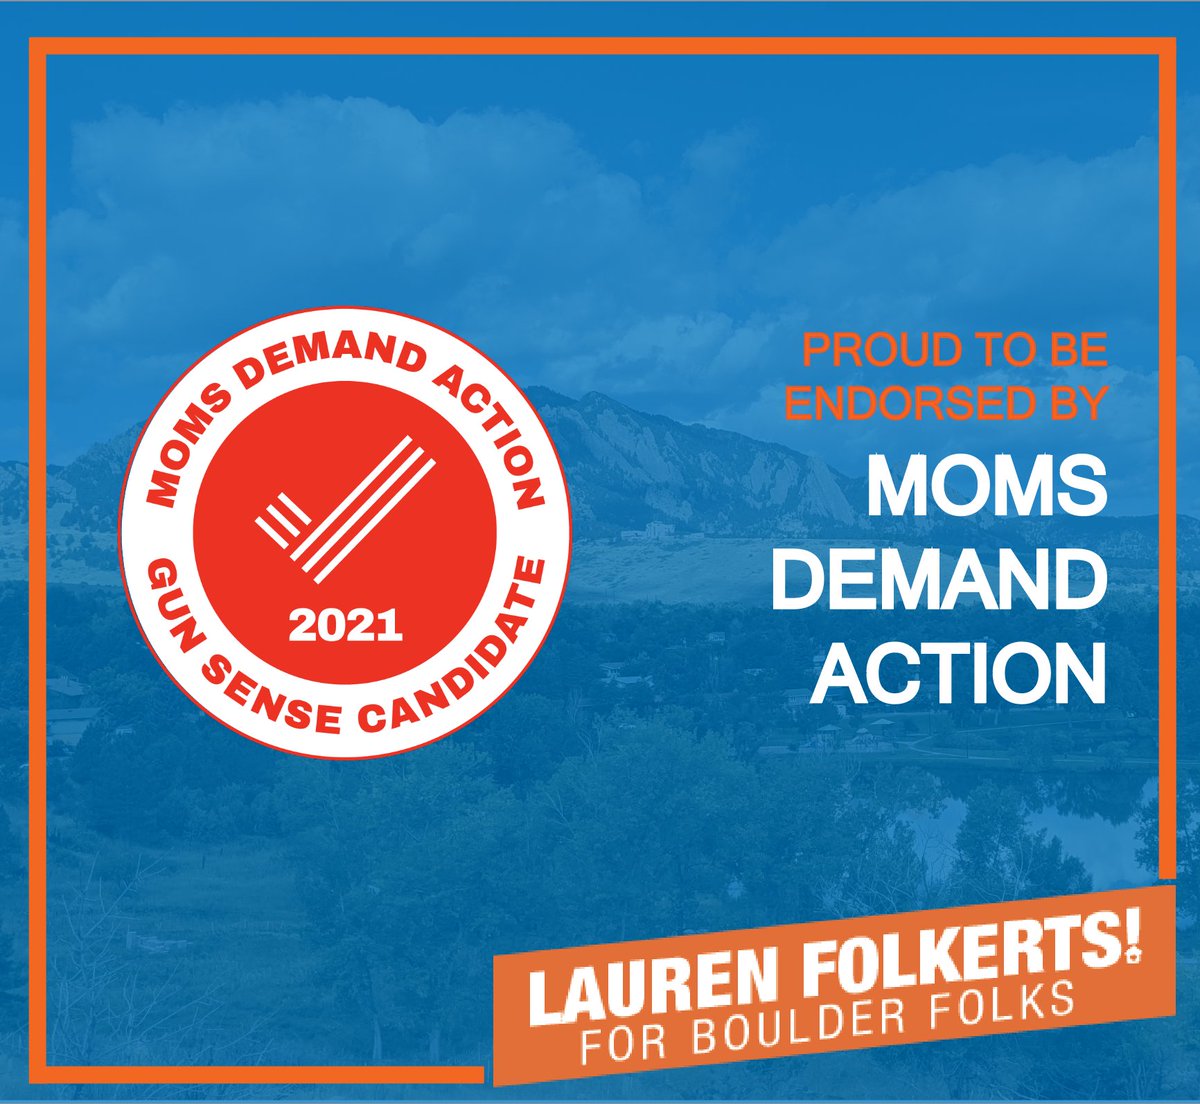 No one should fear going to school, the movie theater, or the grocery store. Sensible gun reform will make our city & community safer. I'm proud to be endorsed by Moms Demand Action and run as a Gun Sense Candidate.